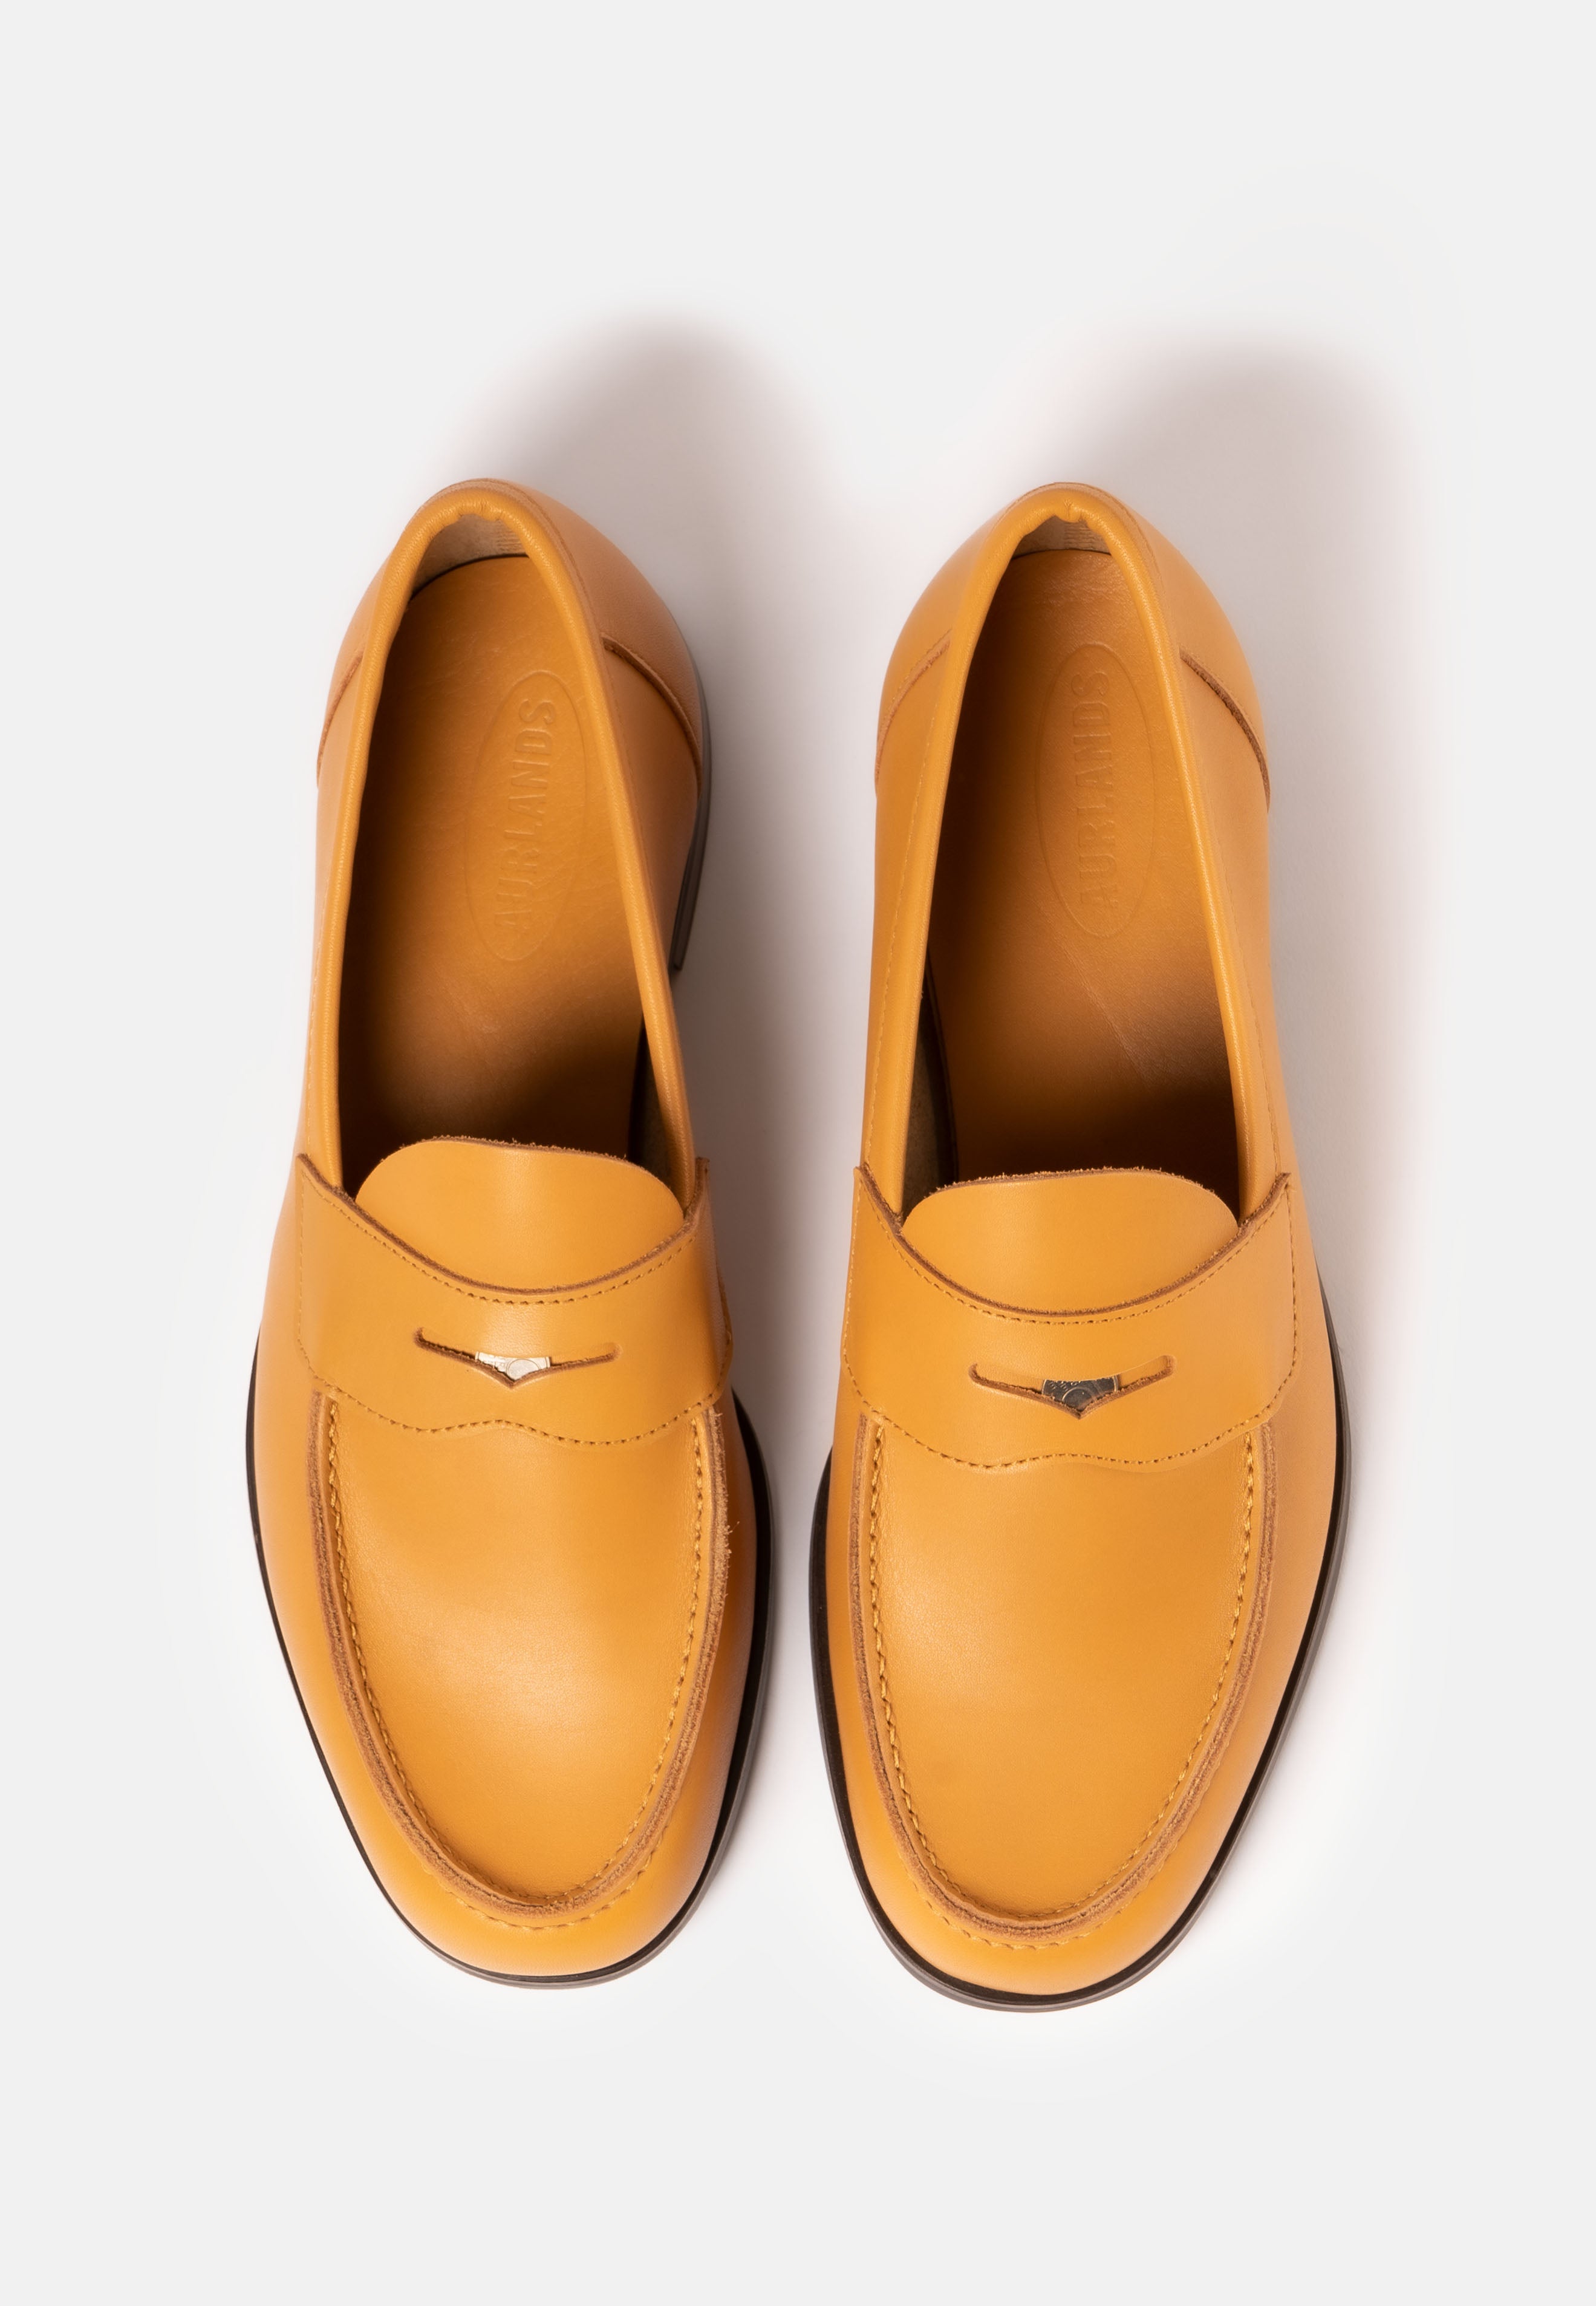 Buxton Caffe Latte Nappa - The Original Penny Loafer